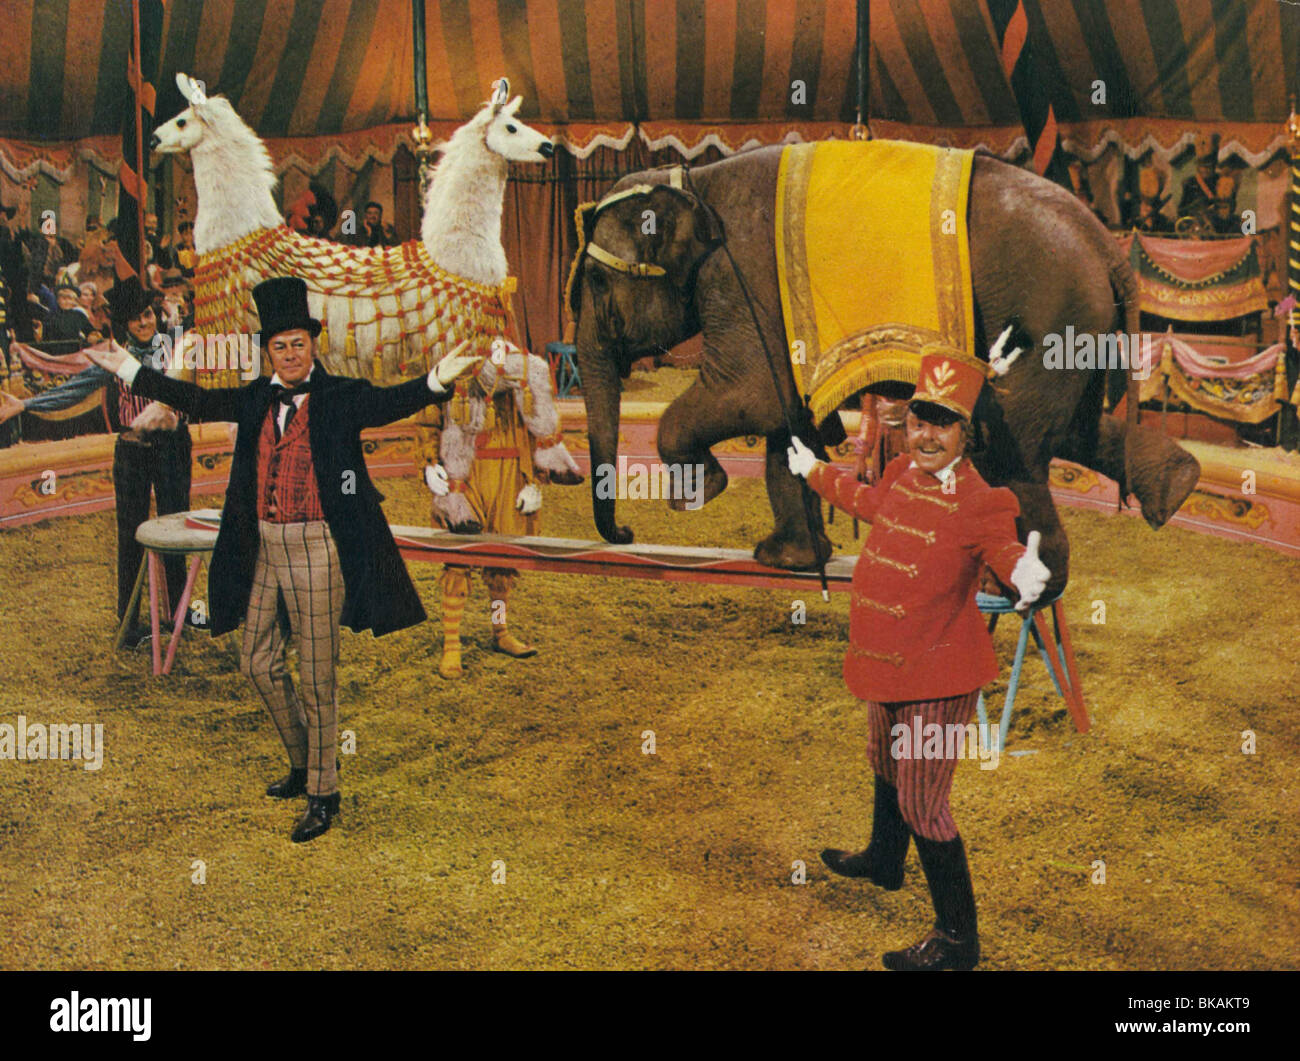 Dr Dolittle 1967 High Resolution Stock Photography and Images - Alamy